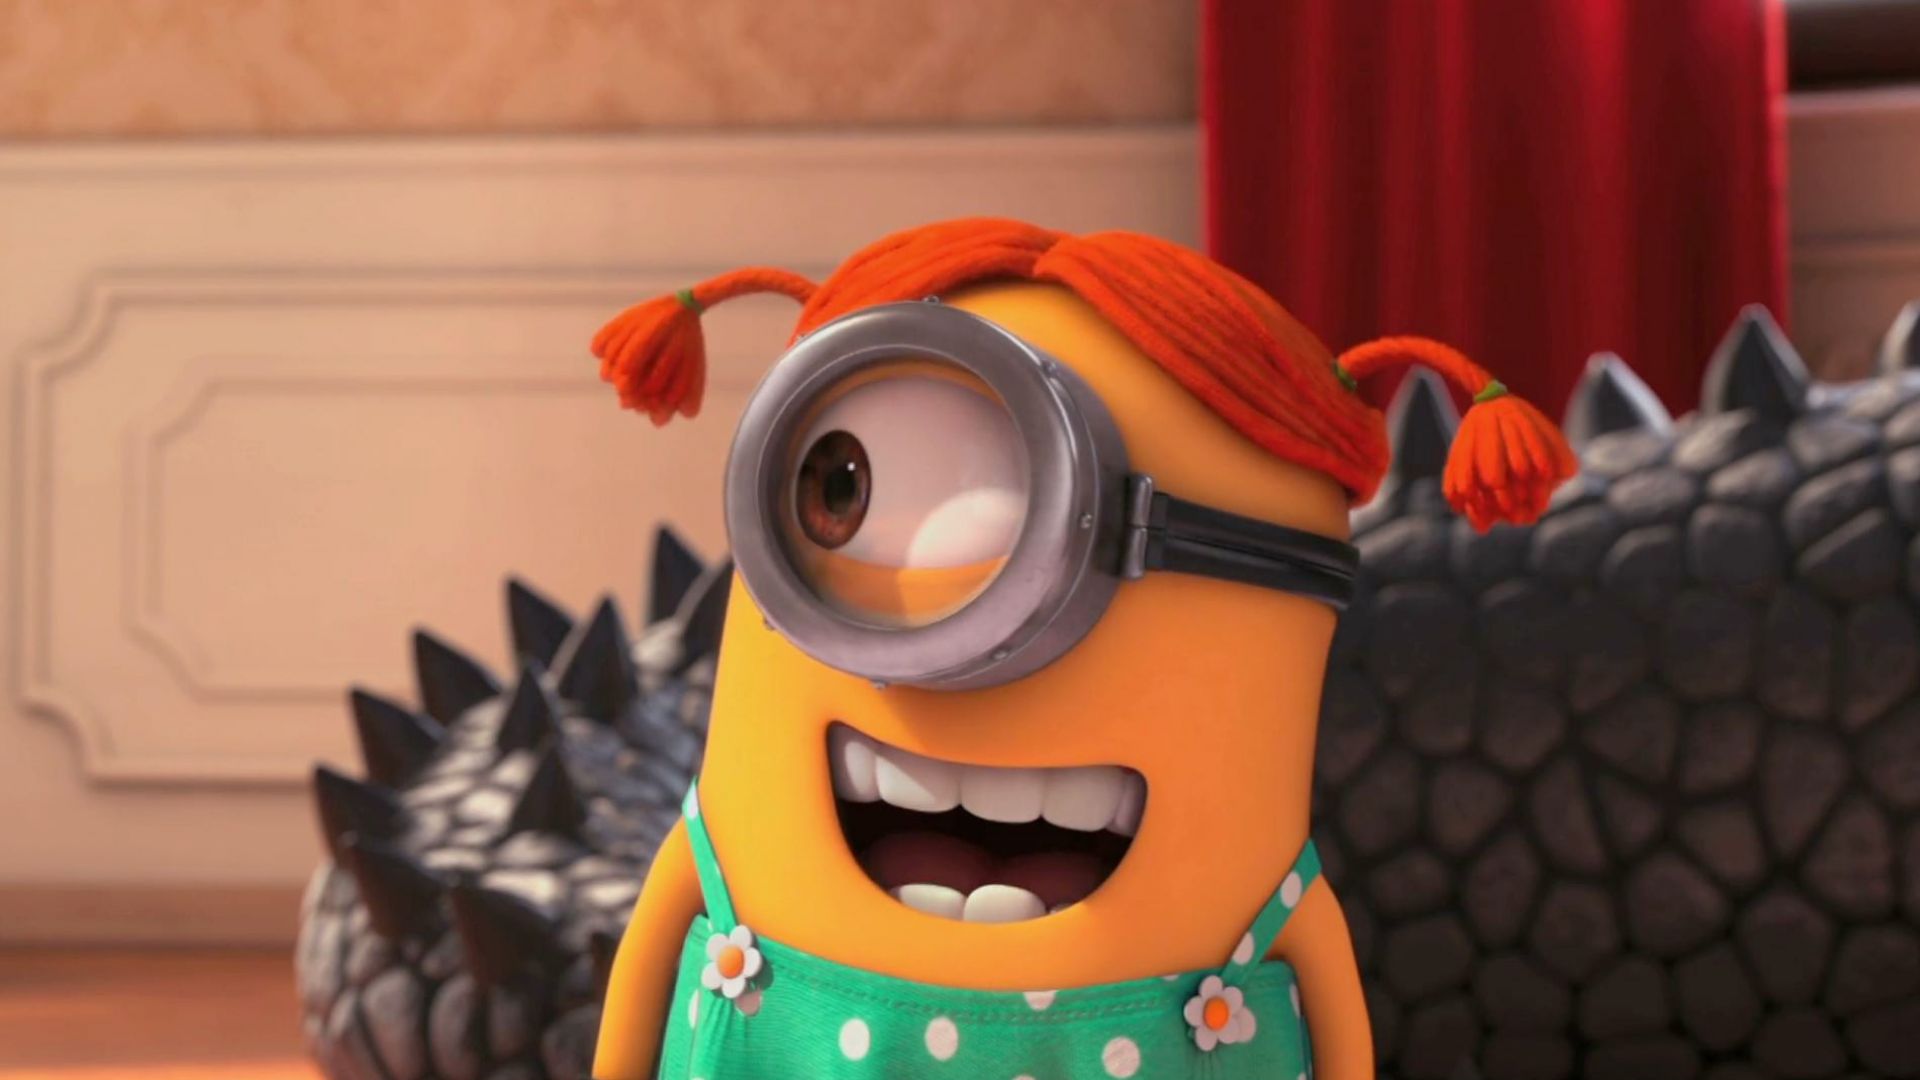 Minion dresses up as Pippi Longstocking in Despicable Me 2